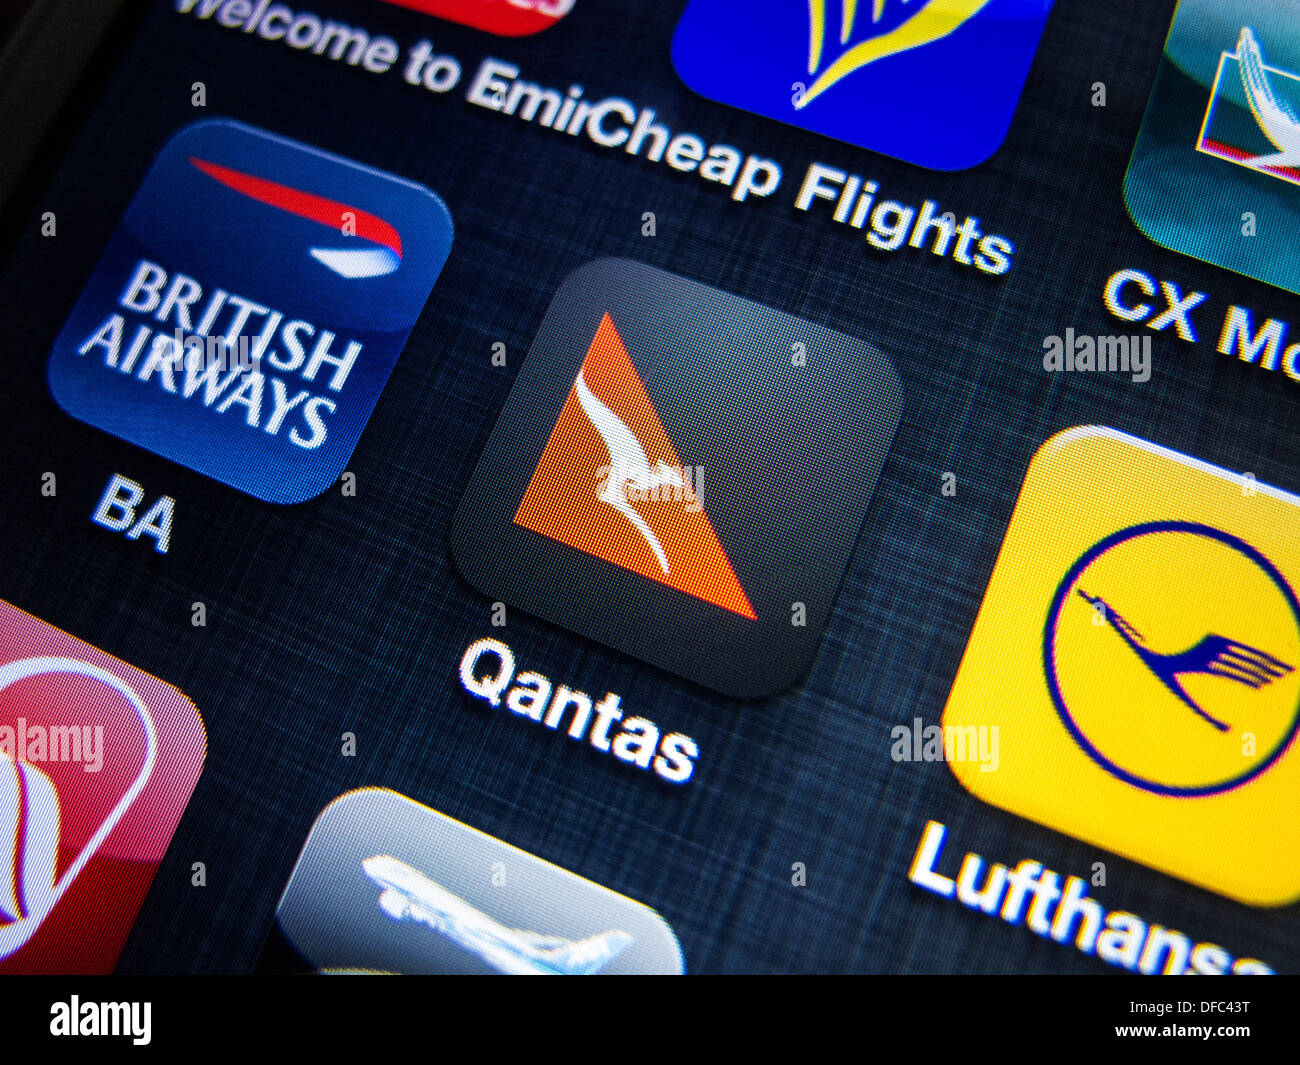 Detail of Qantas airline app icon on phone screen Stock Photo